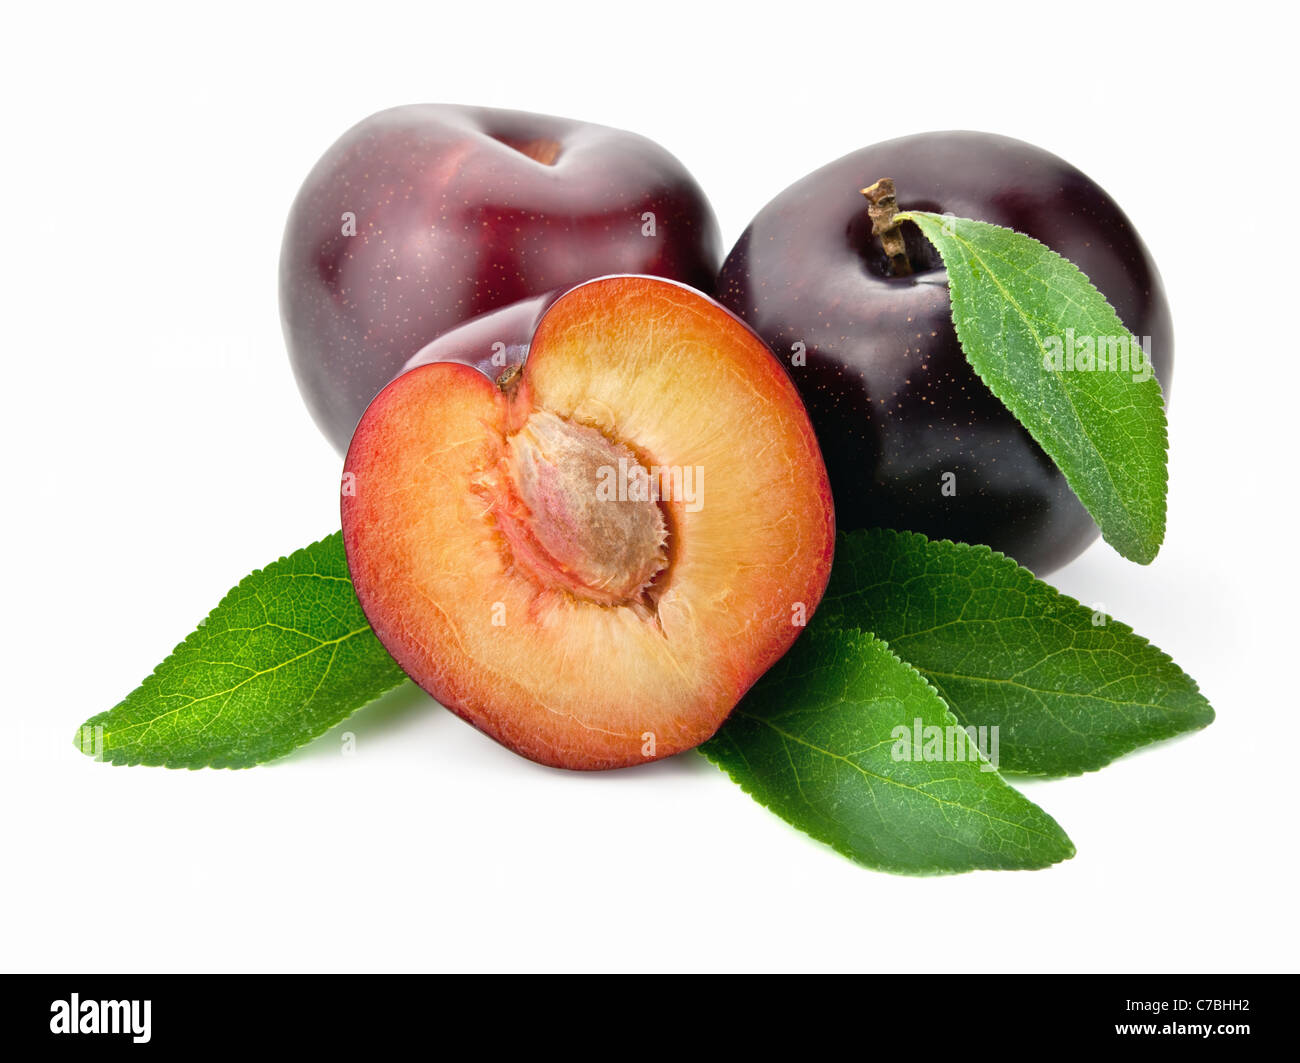 Plums with leaves on white background Stock Photo